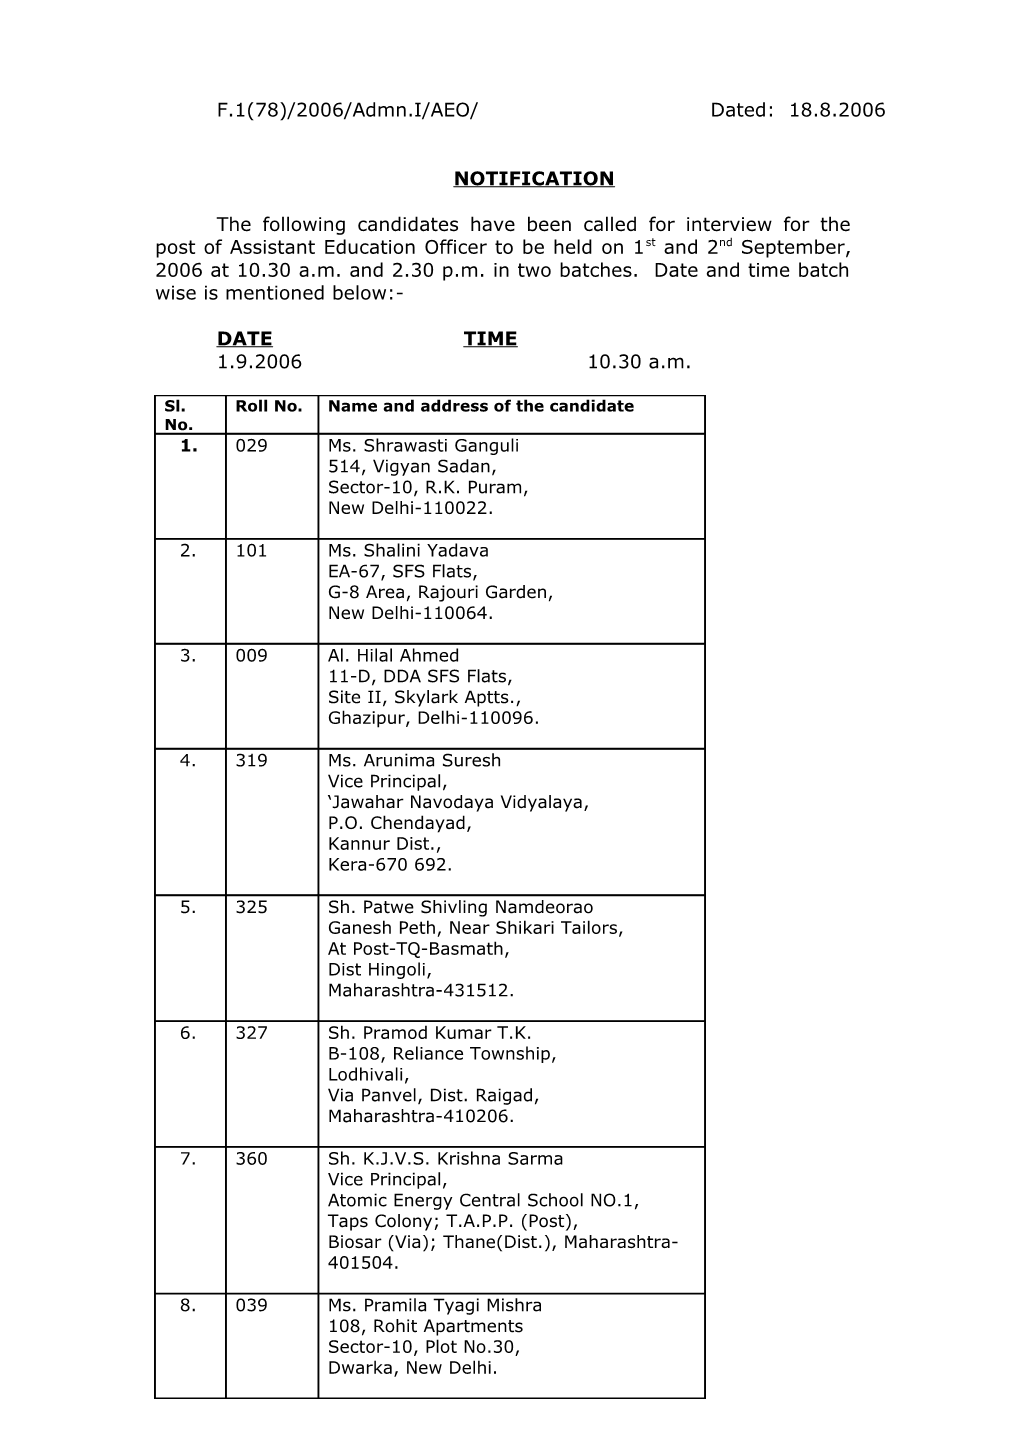 The Following Candidates Have Been Called for Interview for the Post of Assistant Education